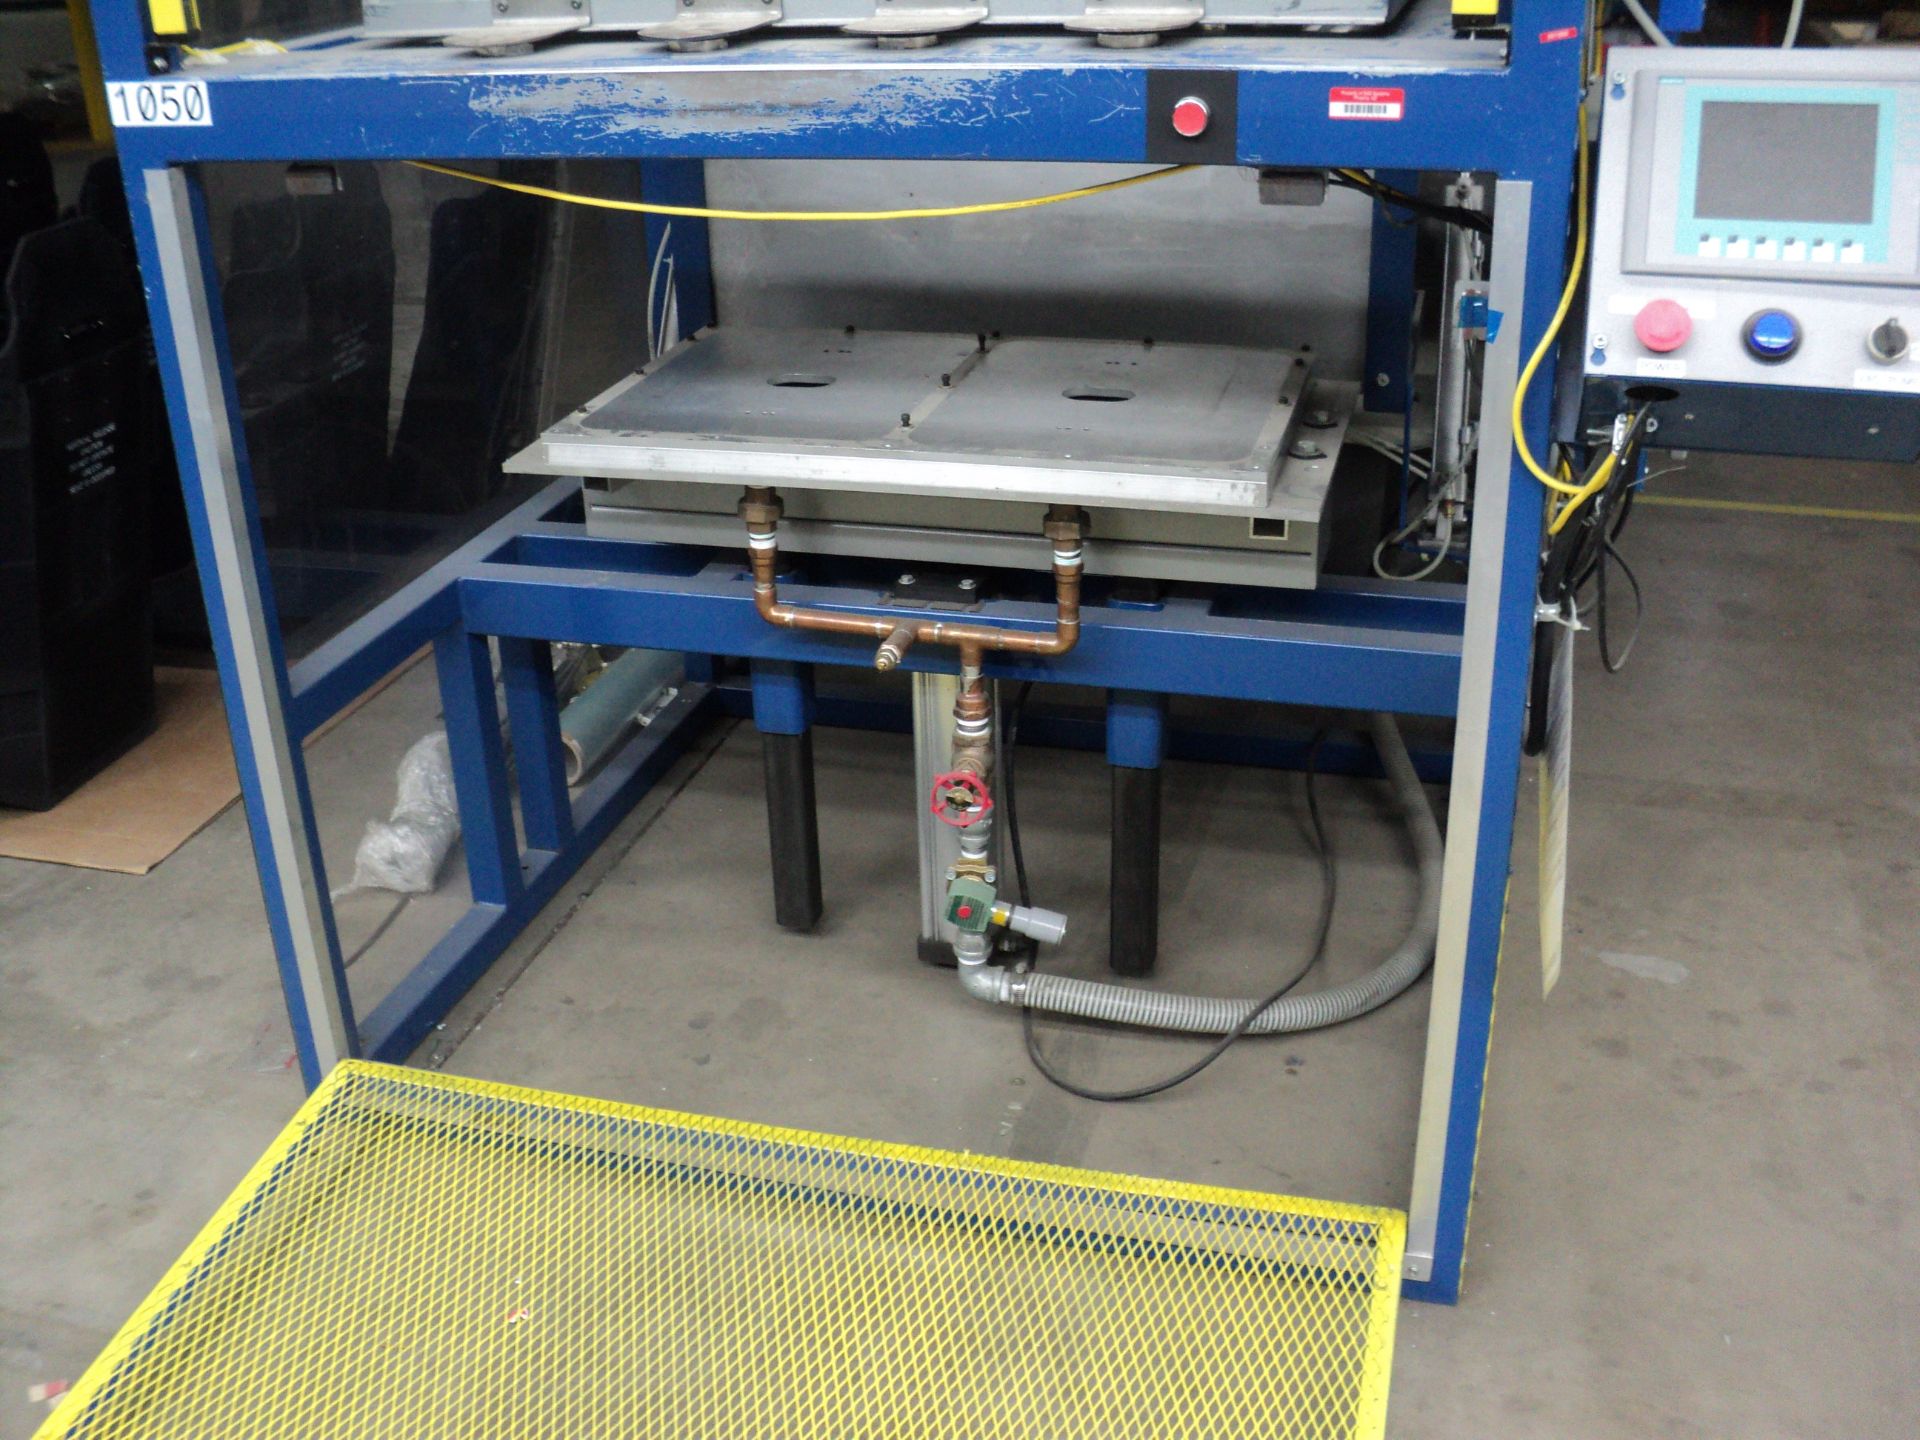 2012 BEL-O-VAC MDL. BV A CLASS, PLC FULL AUTO 24 X 38 PRODUCTION VACUUM FORMER, UNIT 1050 (THIS ITEM - Image 3 of 5